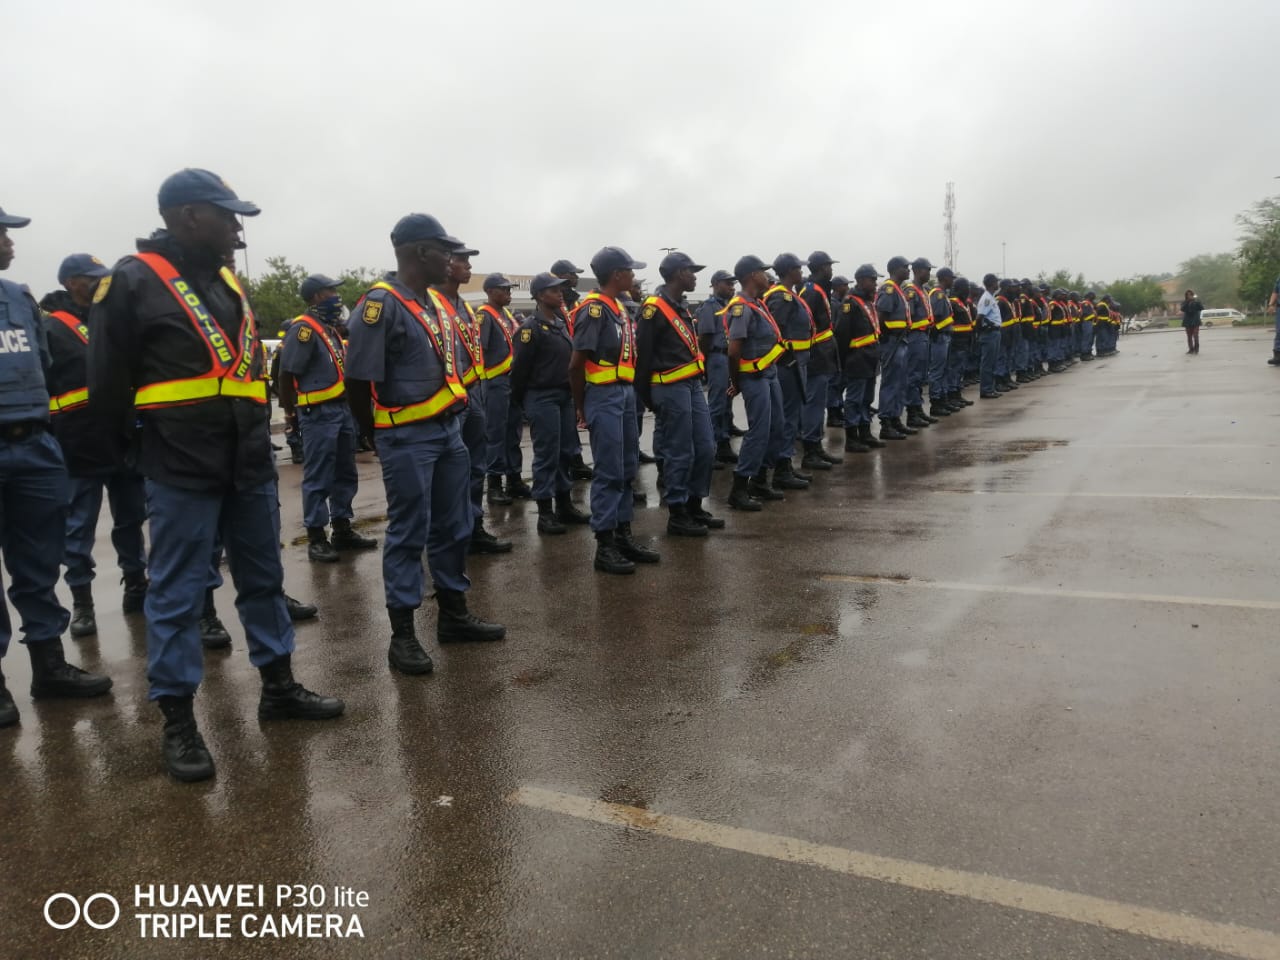 Multiple successes with Safer Festive Season operations aimed at reducing crime levels in the Limpopo province